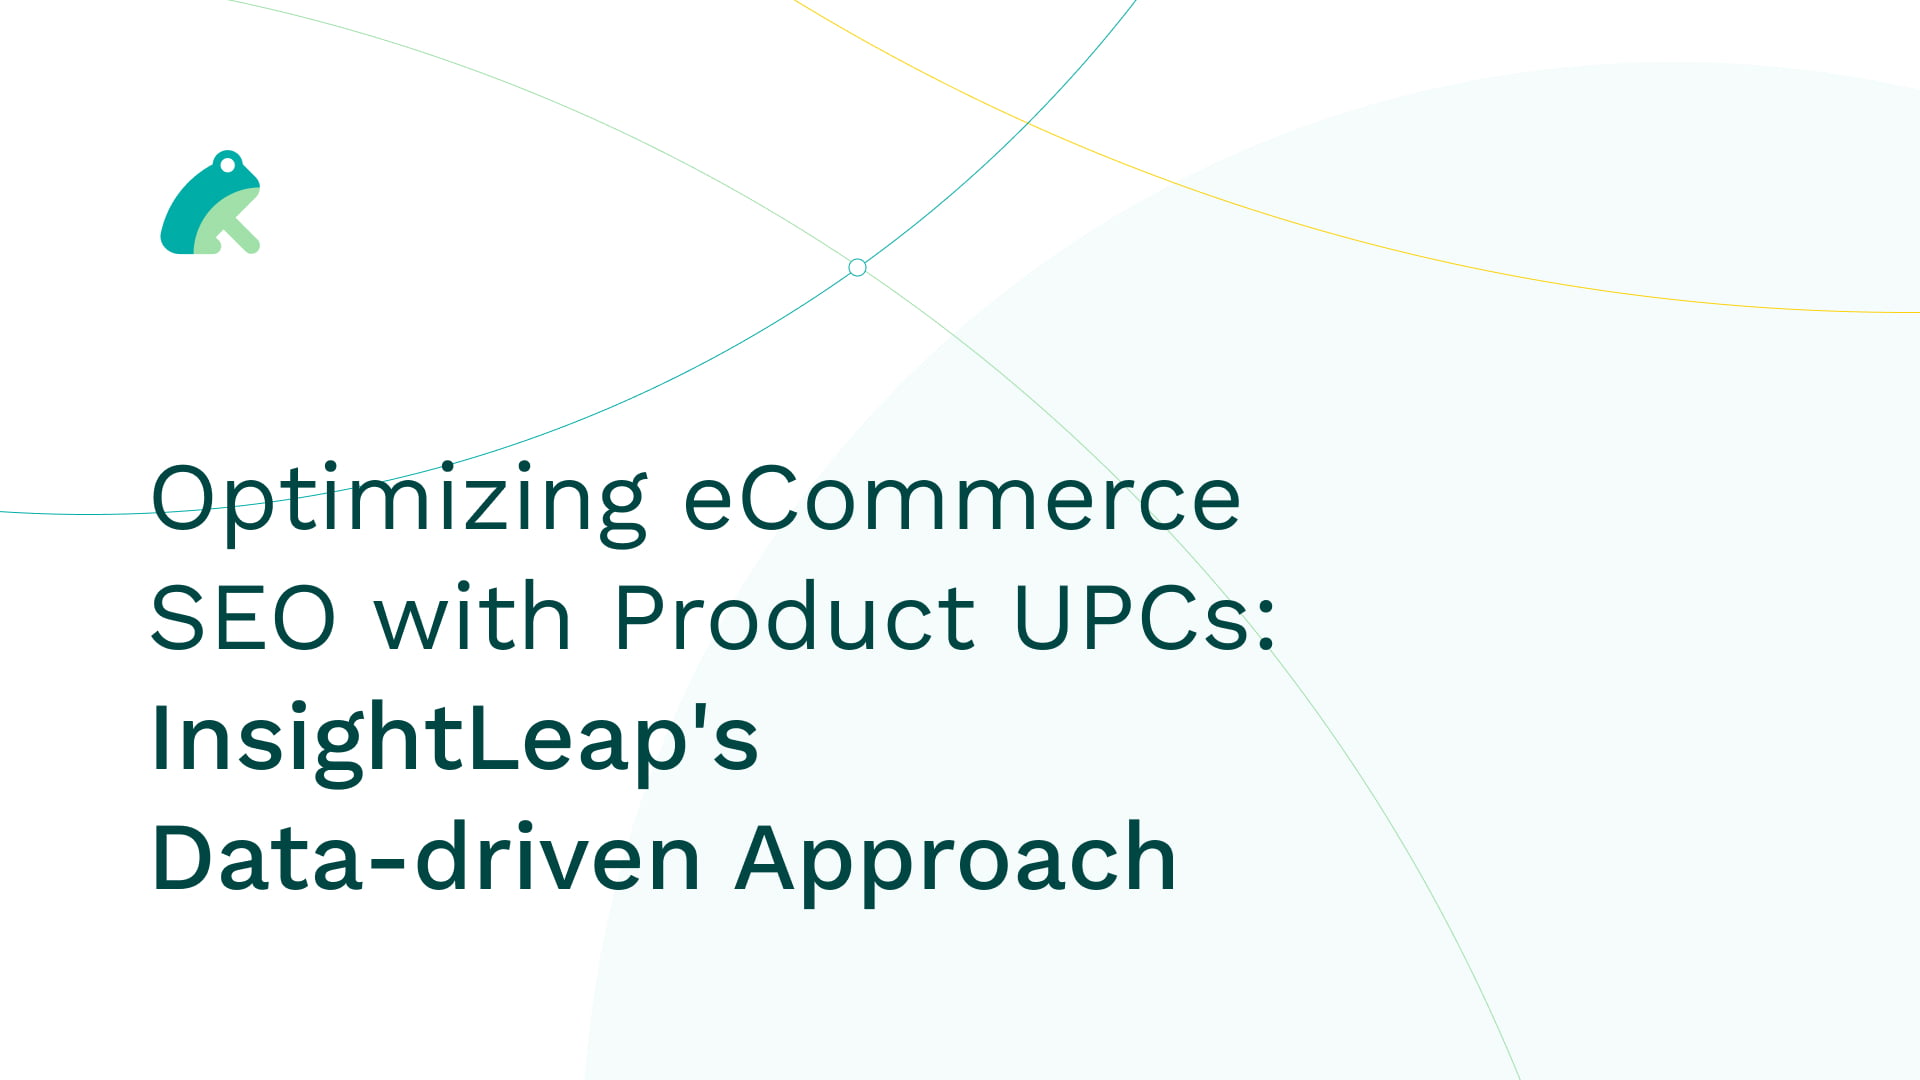 Optimizing eCommerce SEO with Product UPCs: InsightLeap's Data-driven Approach